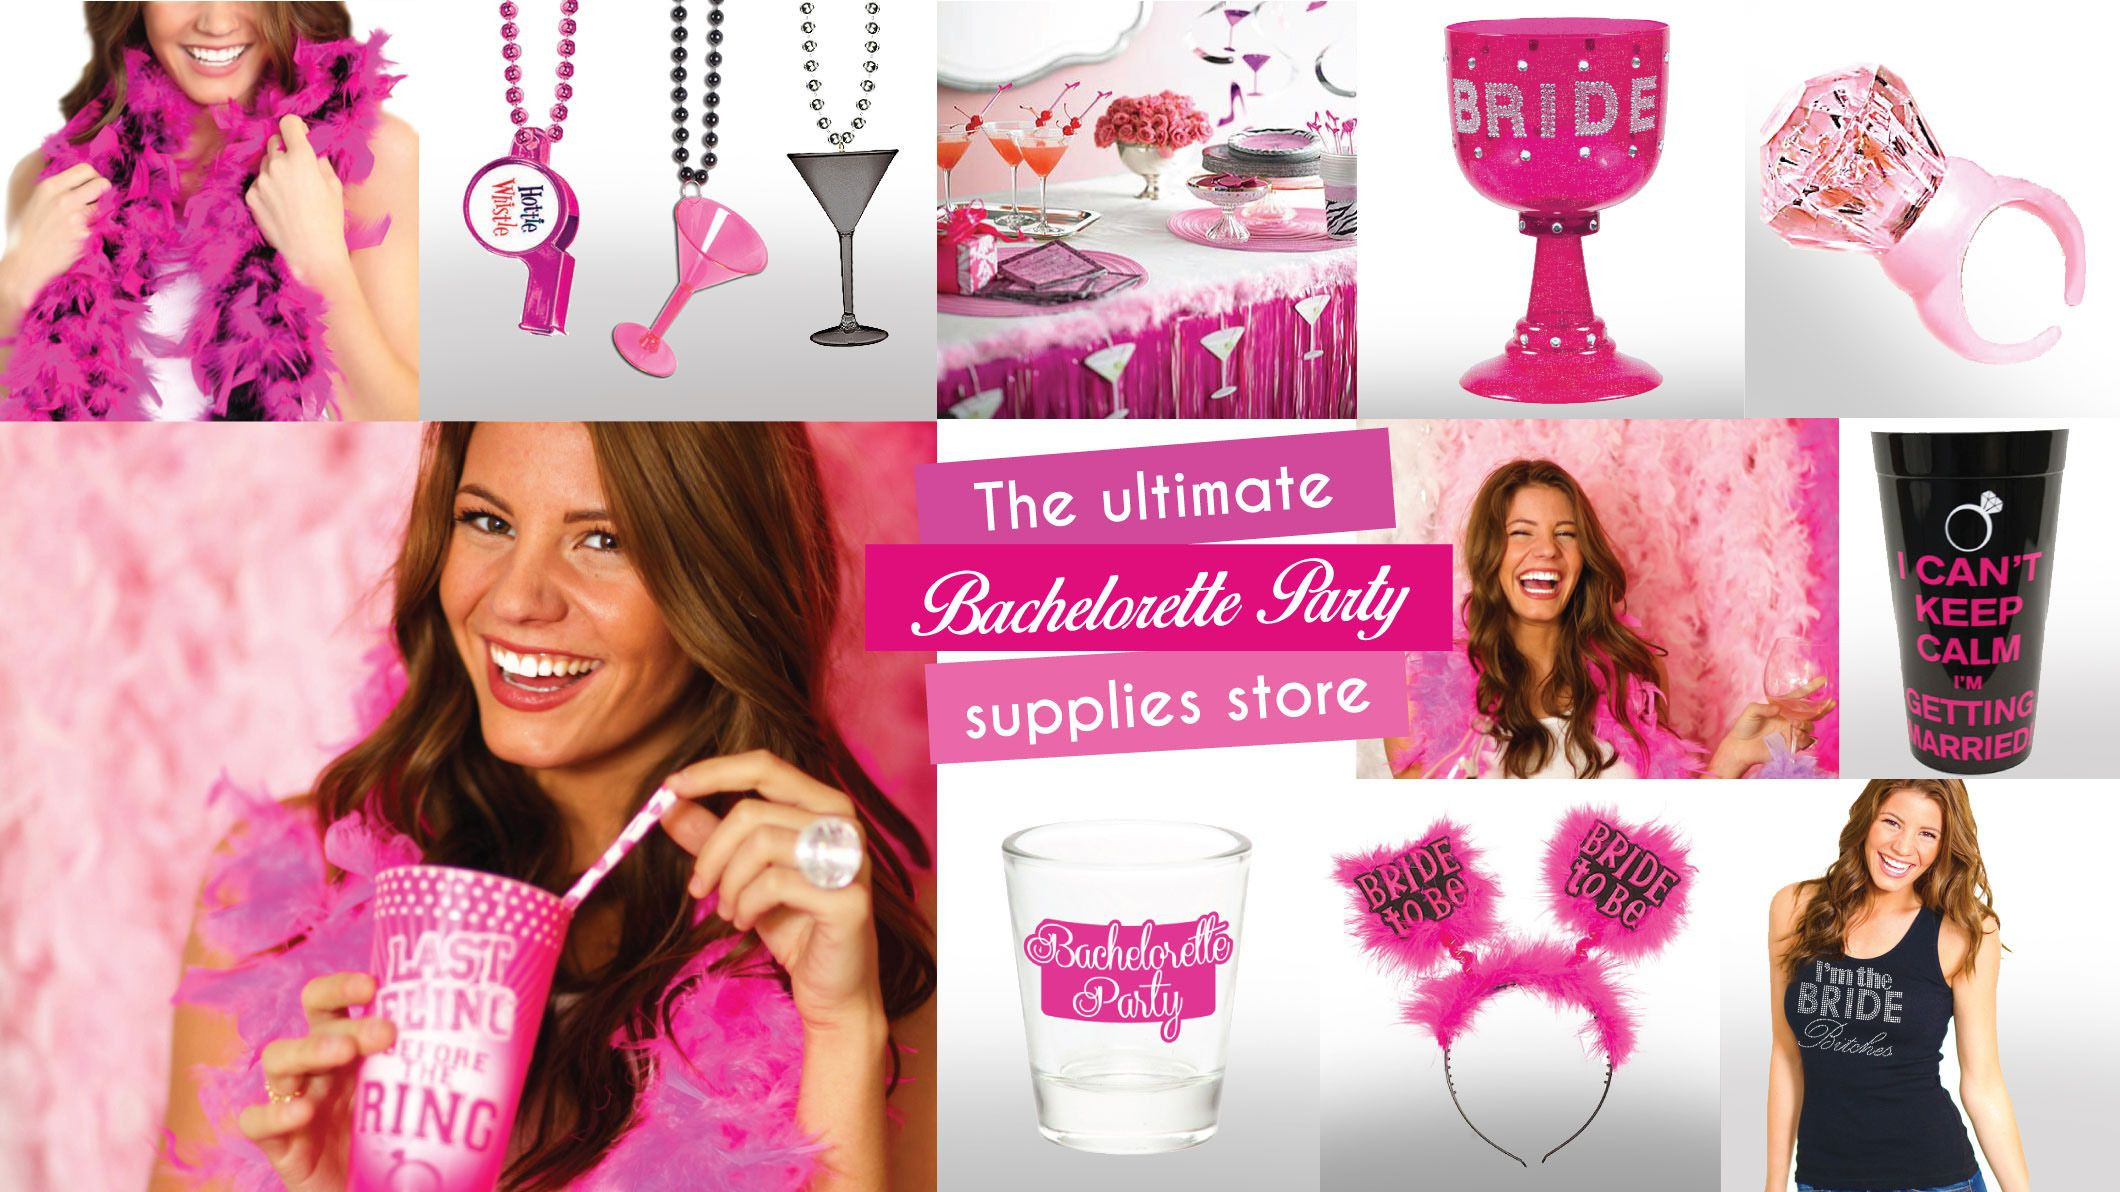 Ultimate Bachelorette Party Ideas
 The Ultimate Bachelorette Party Supplies Store